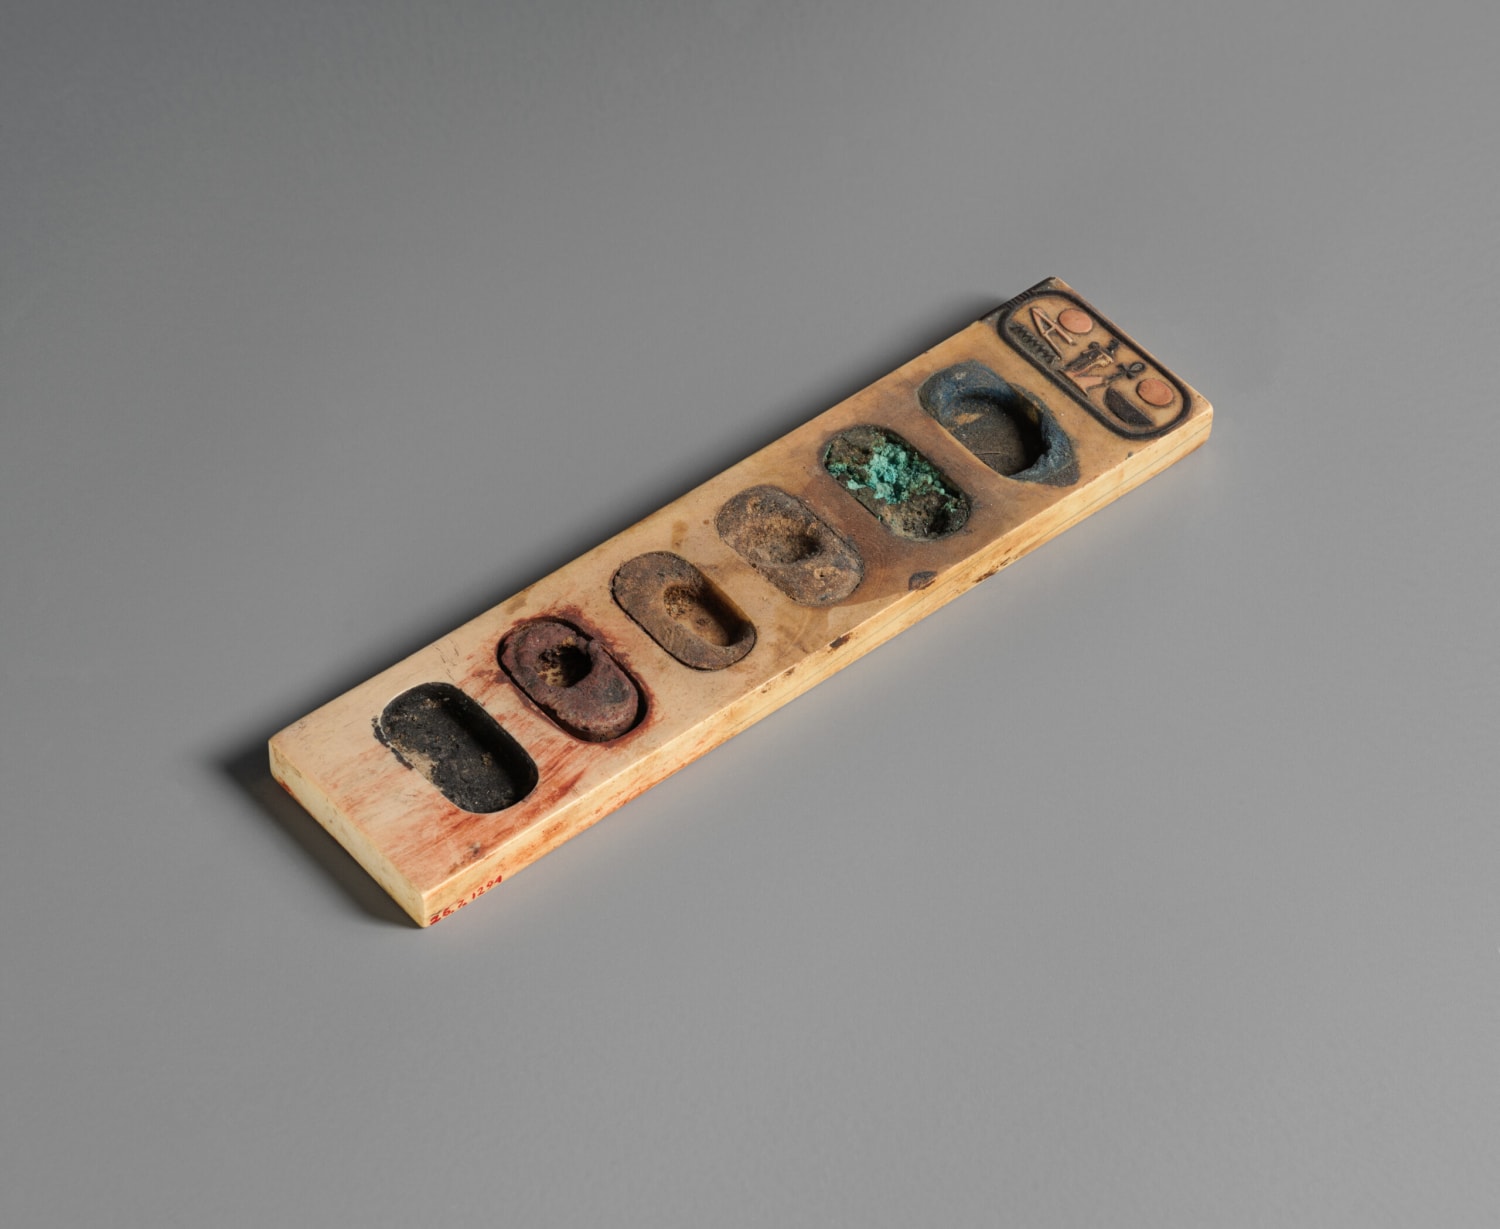 A 3,000-Year-Old Painter’s Palette from Ancient Egypt, with Traces of the Original Colors Still In It